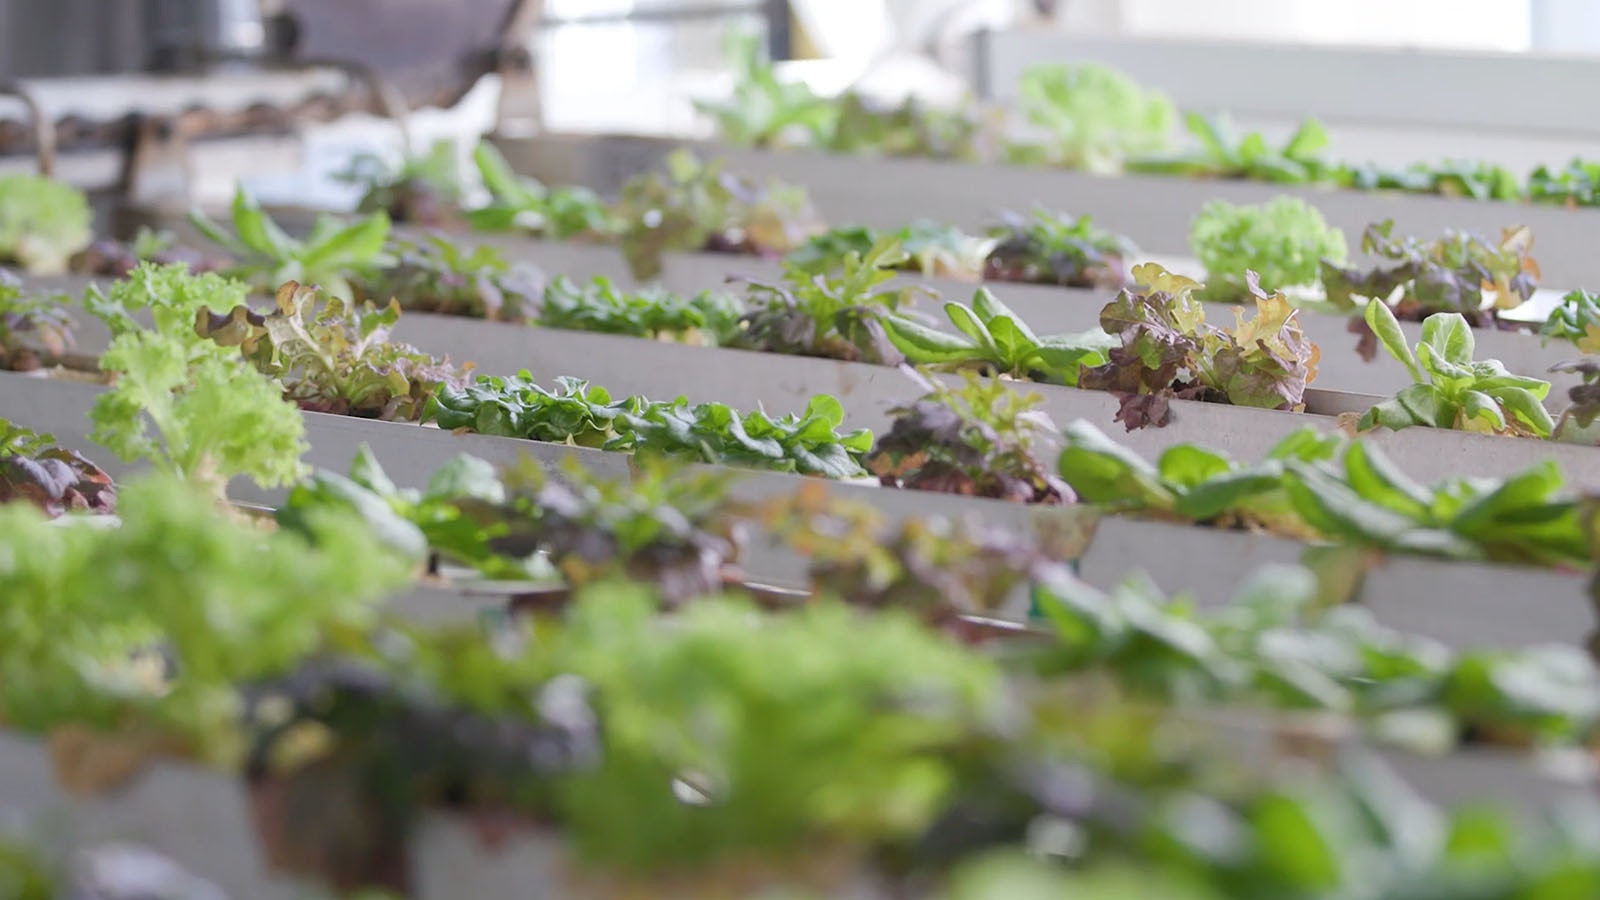 Vertical Harvest produces a wide variety of greens at its Jackson, Wyoming, facility.